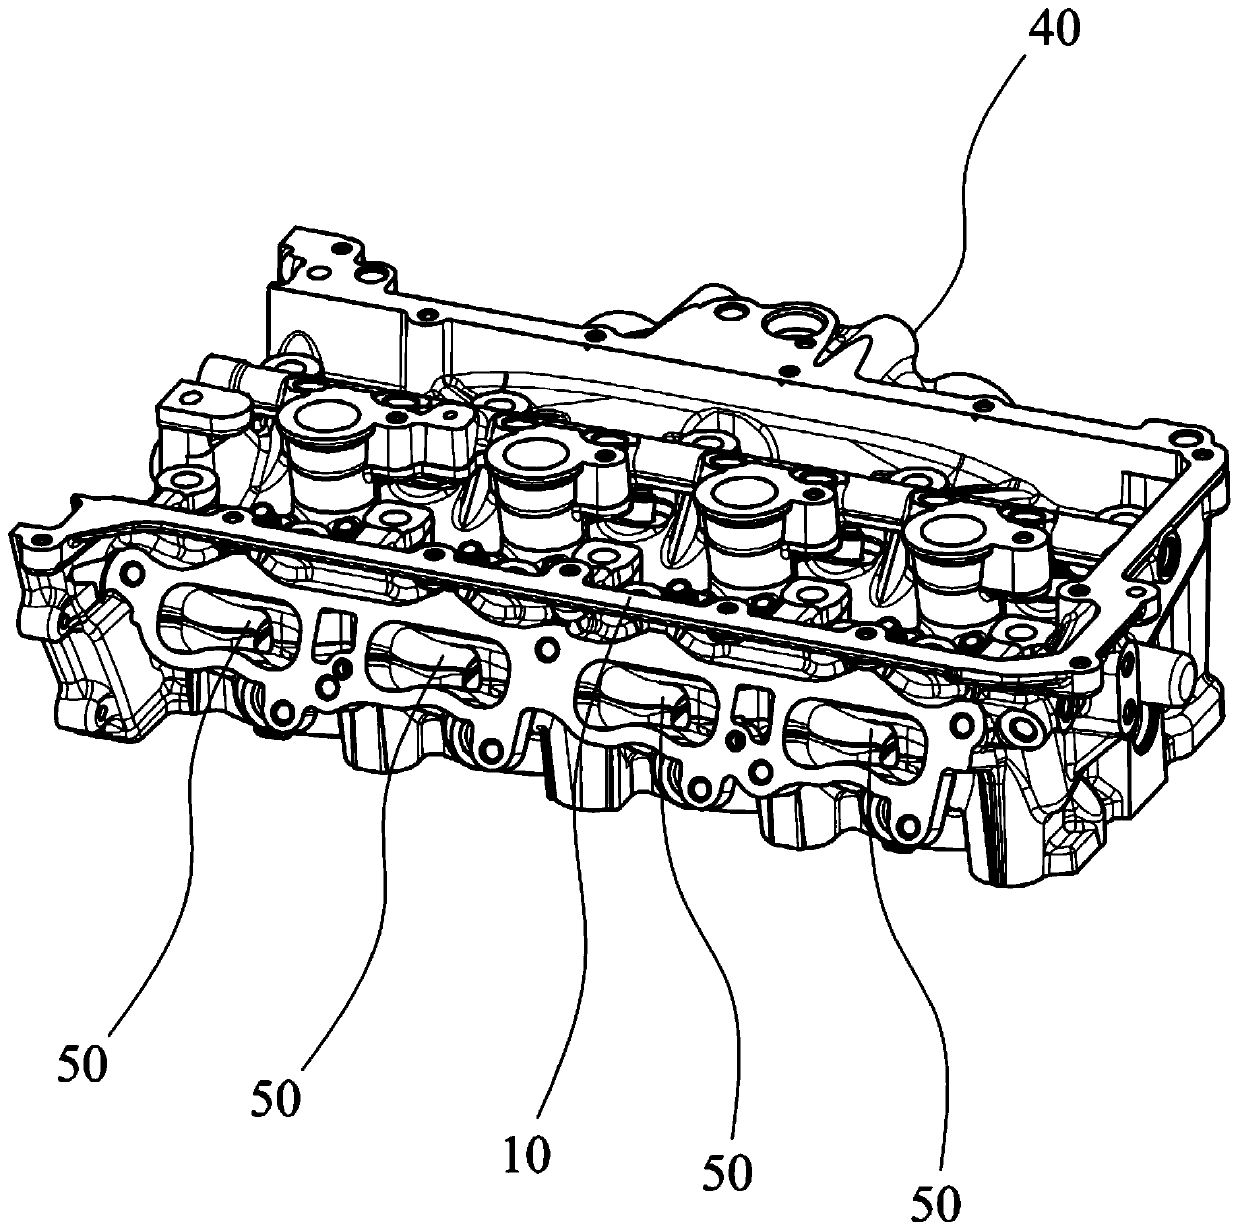 Cylinder cover integrated with exhaust manifold, engine and automobile